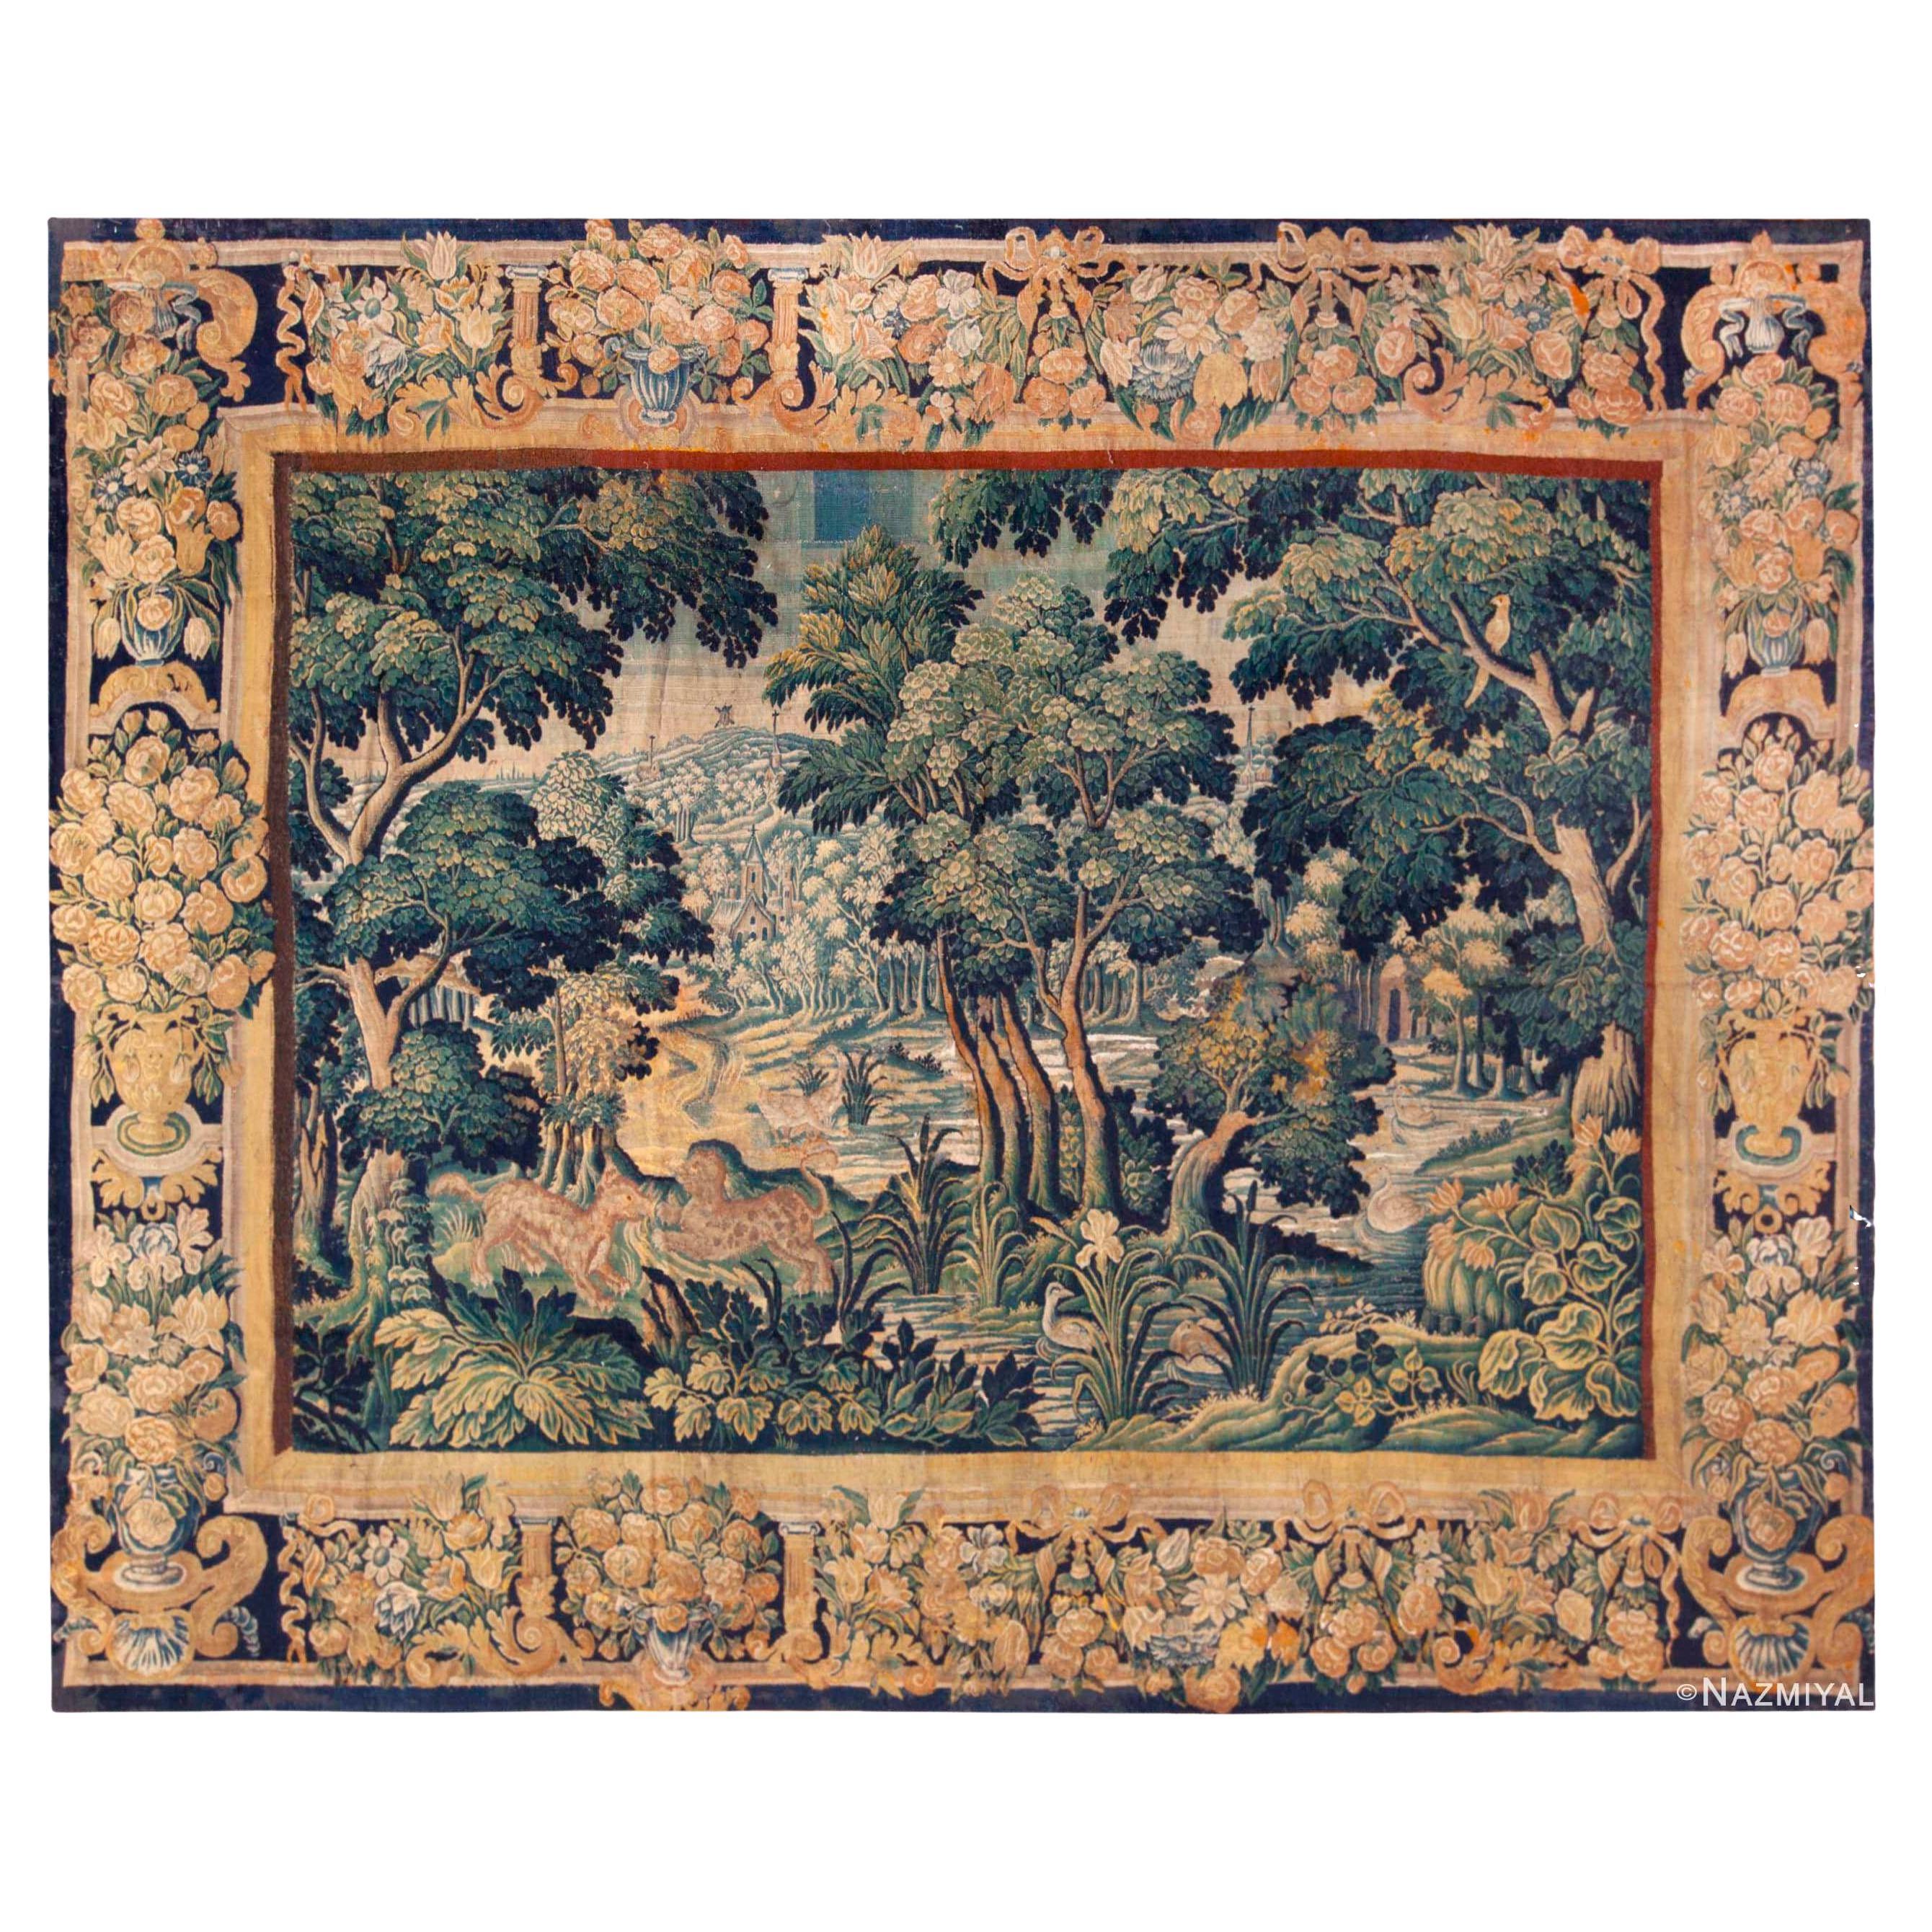 Amazing 17th Century Antique French Silk And Wool Verdure Tapestry 10' x 12'10" For Sale